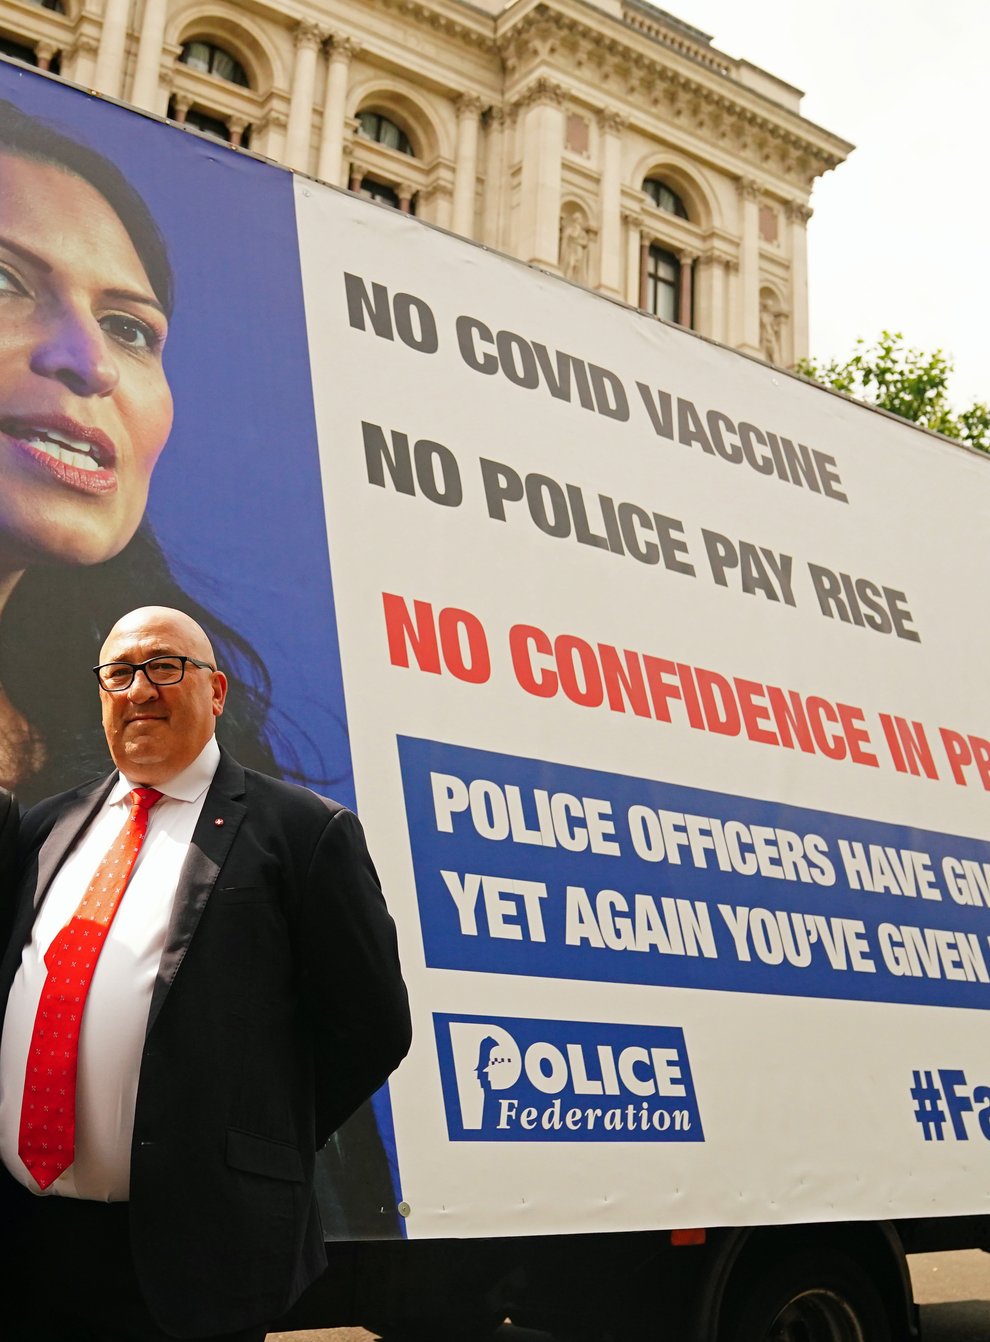 Chairman of the Police Federation John Apter (left) and Ken Marsh, Chairman of the Metropolitan Police Federation stand in front of an advertising van with a poster of Home Secretary Priti Patel as they deliver a letter to 10 Downing Street, London, setting out officers’ anger over a pay freeze and objections to the Government’s Beating Crime Plan (Victoria Jones/PA)